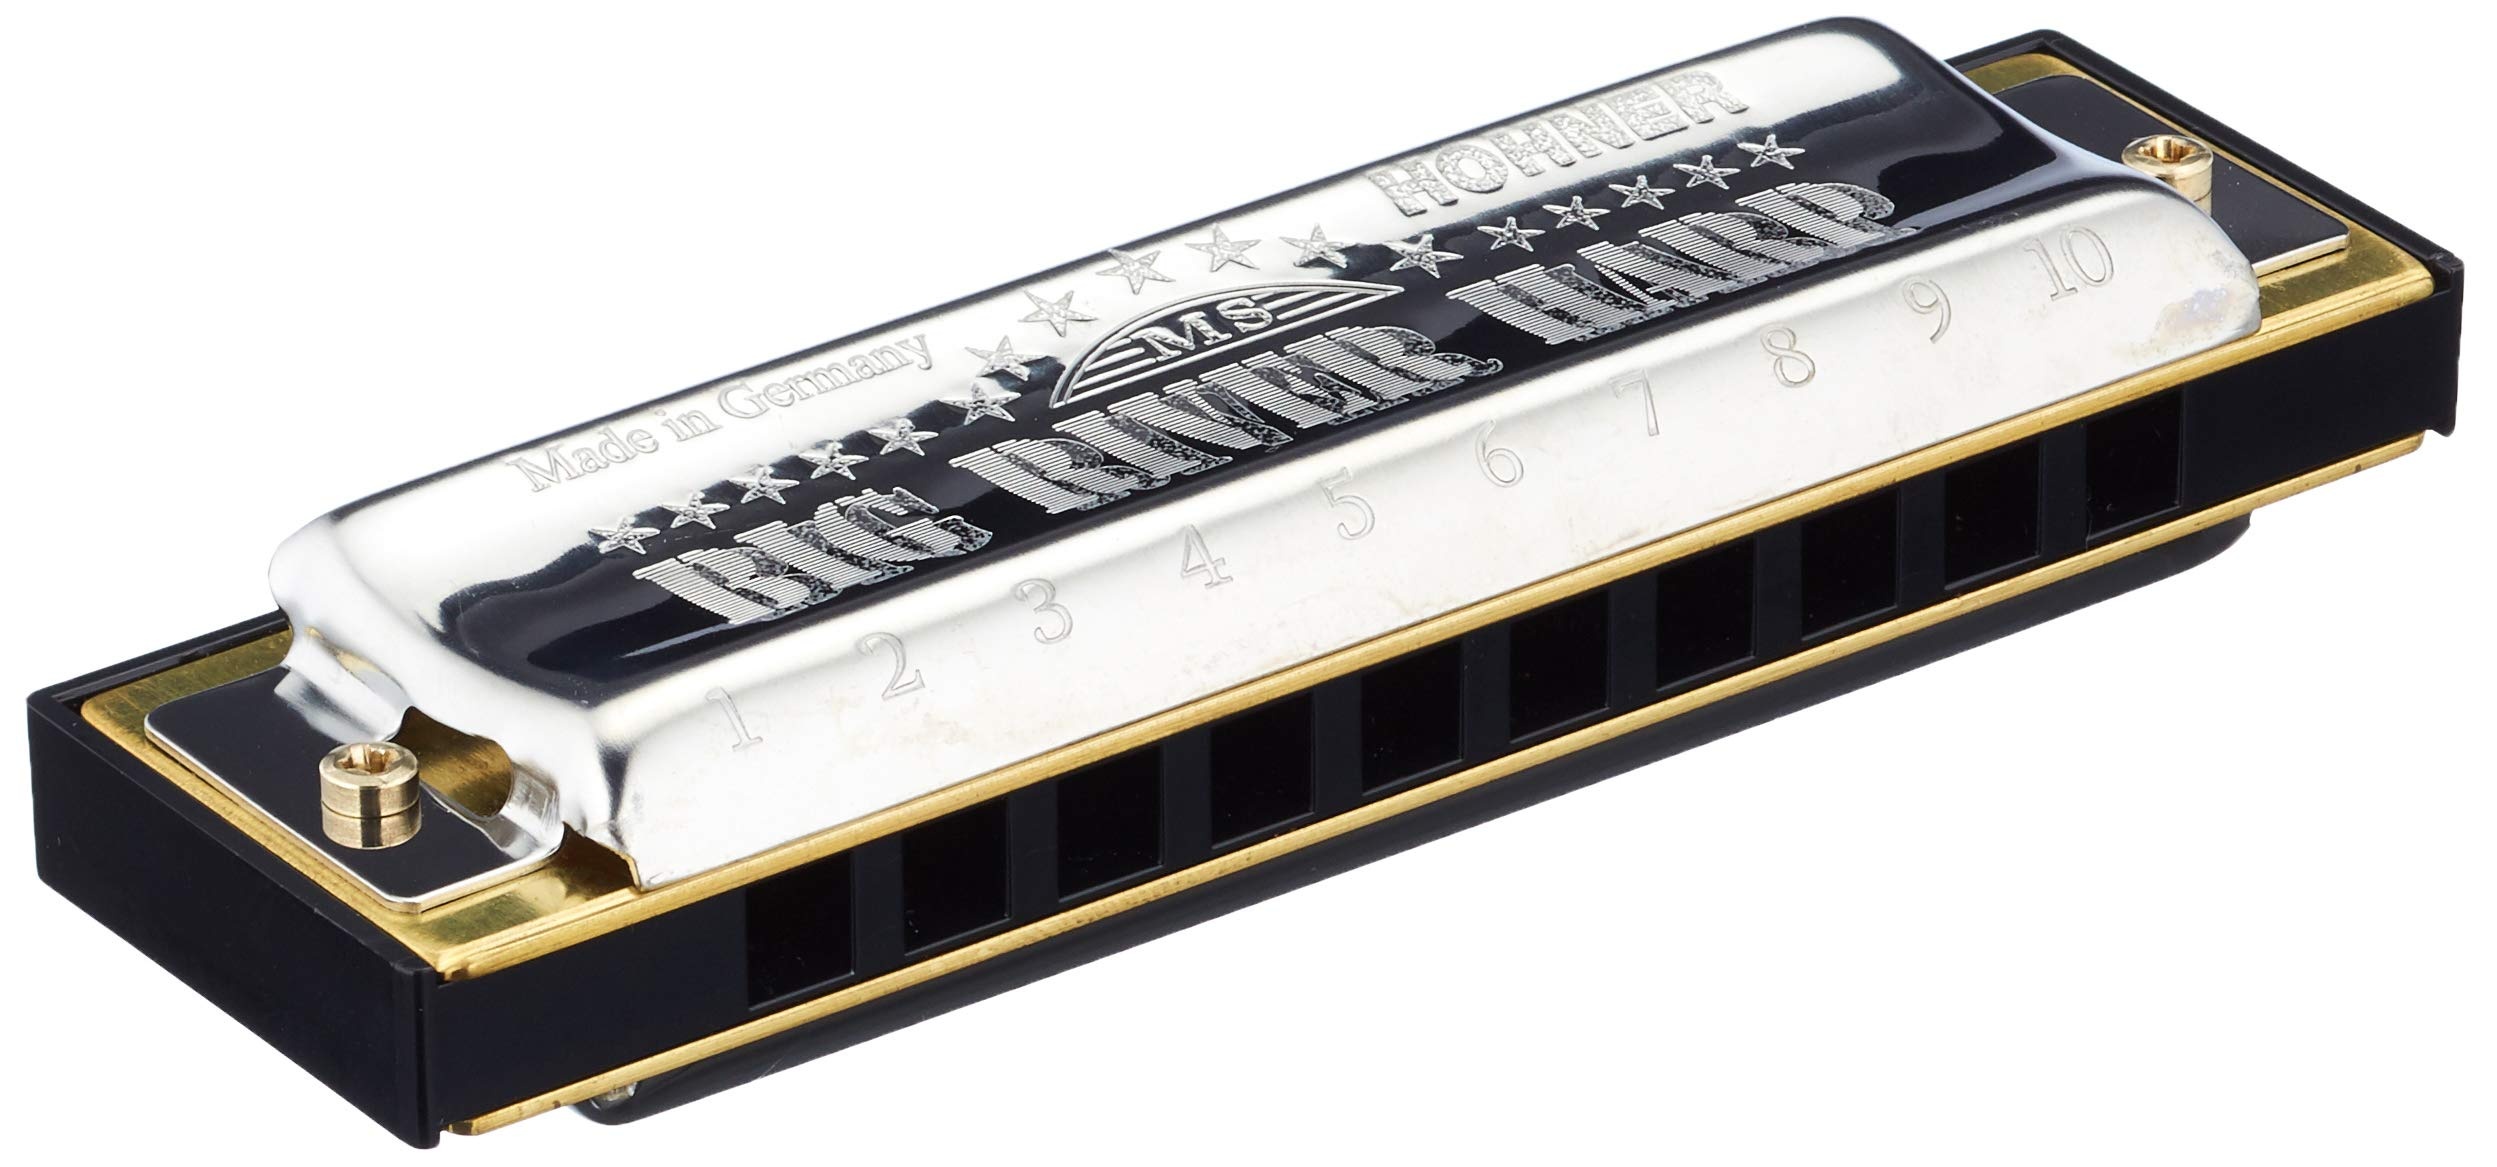 Harmonica: Big River Harp, 10-Hole Type, Column Of Air Set Into Vibration By The Player Blowing, MS, Made In Germany. 2500x1170 Dual Screen Wallpaper.